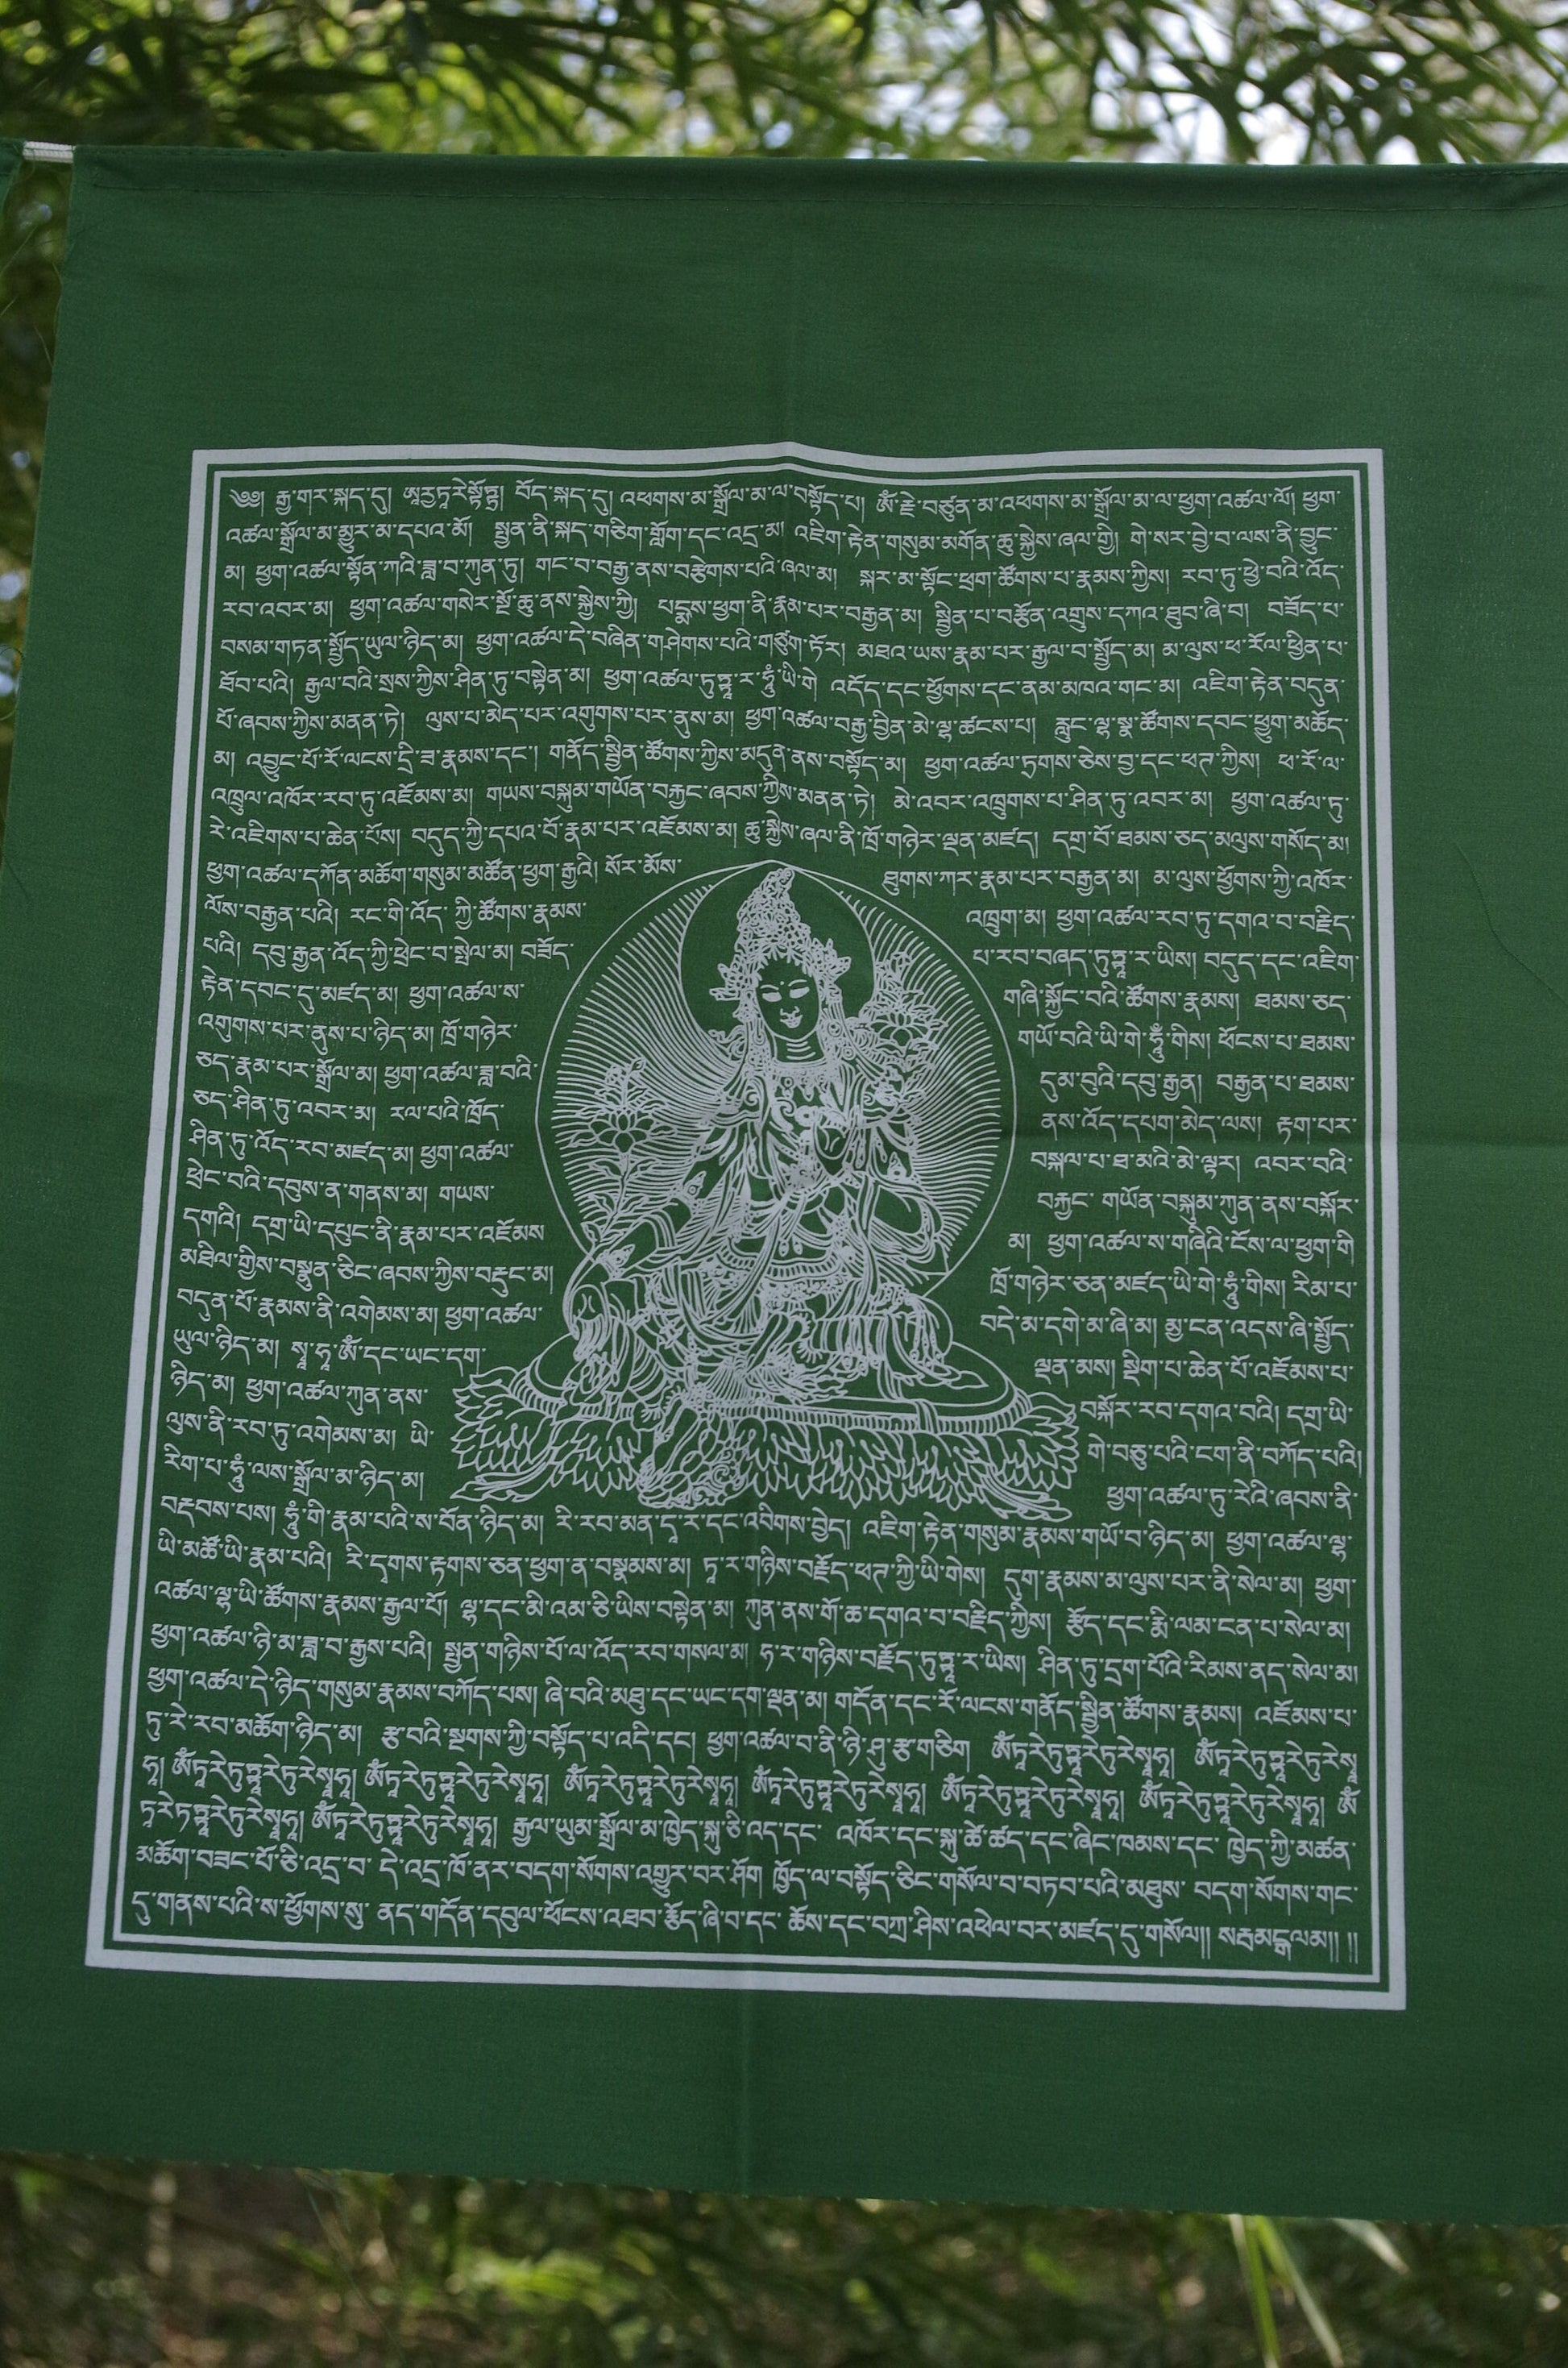 A single flag from a 5 flag strand of high-quality Green Tara Tibetan prayer flags, with white ink on green cloth, each measuring 14x17 inches and hanging outdoors.